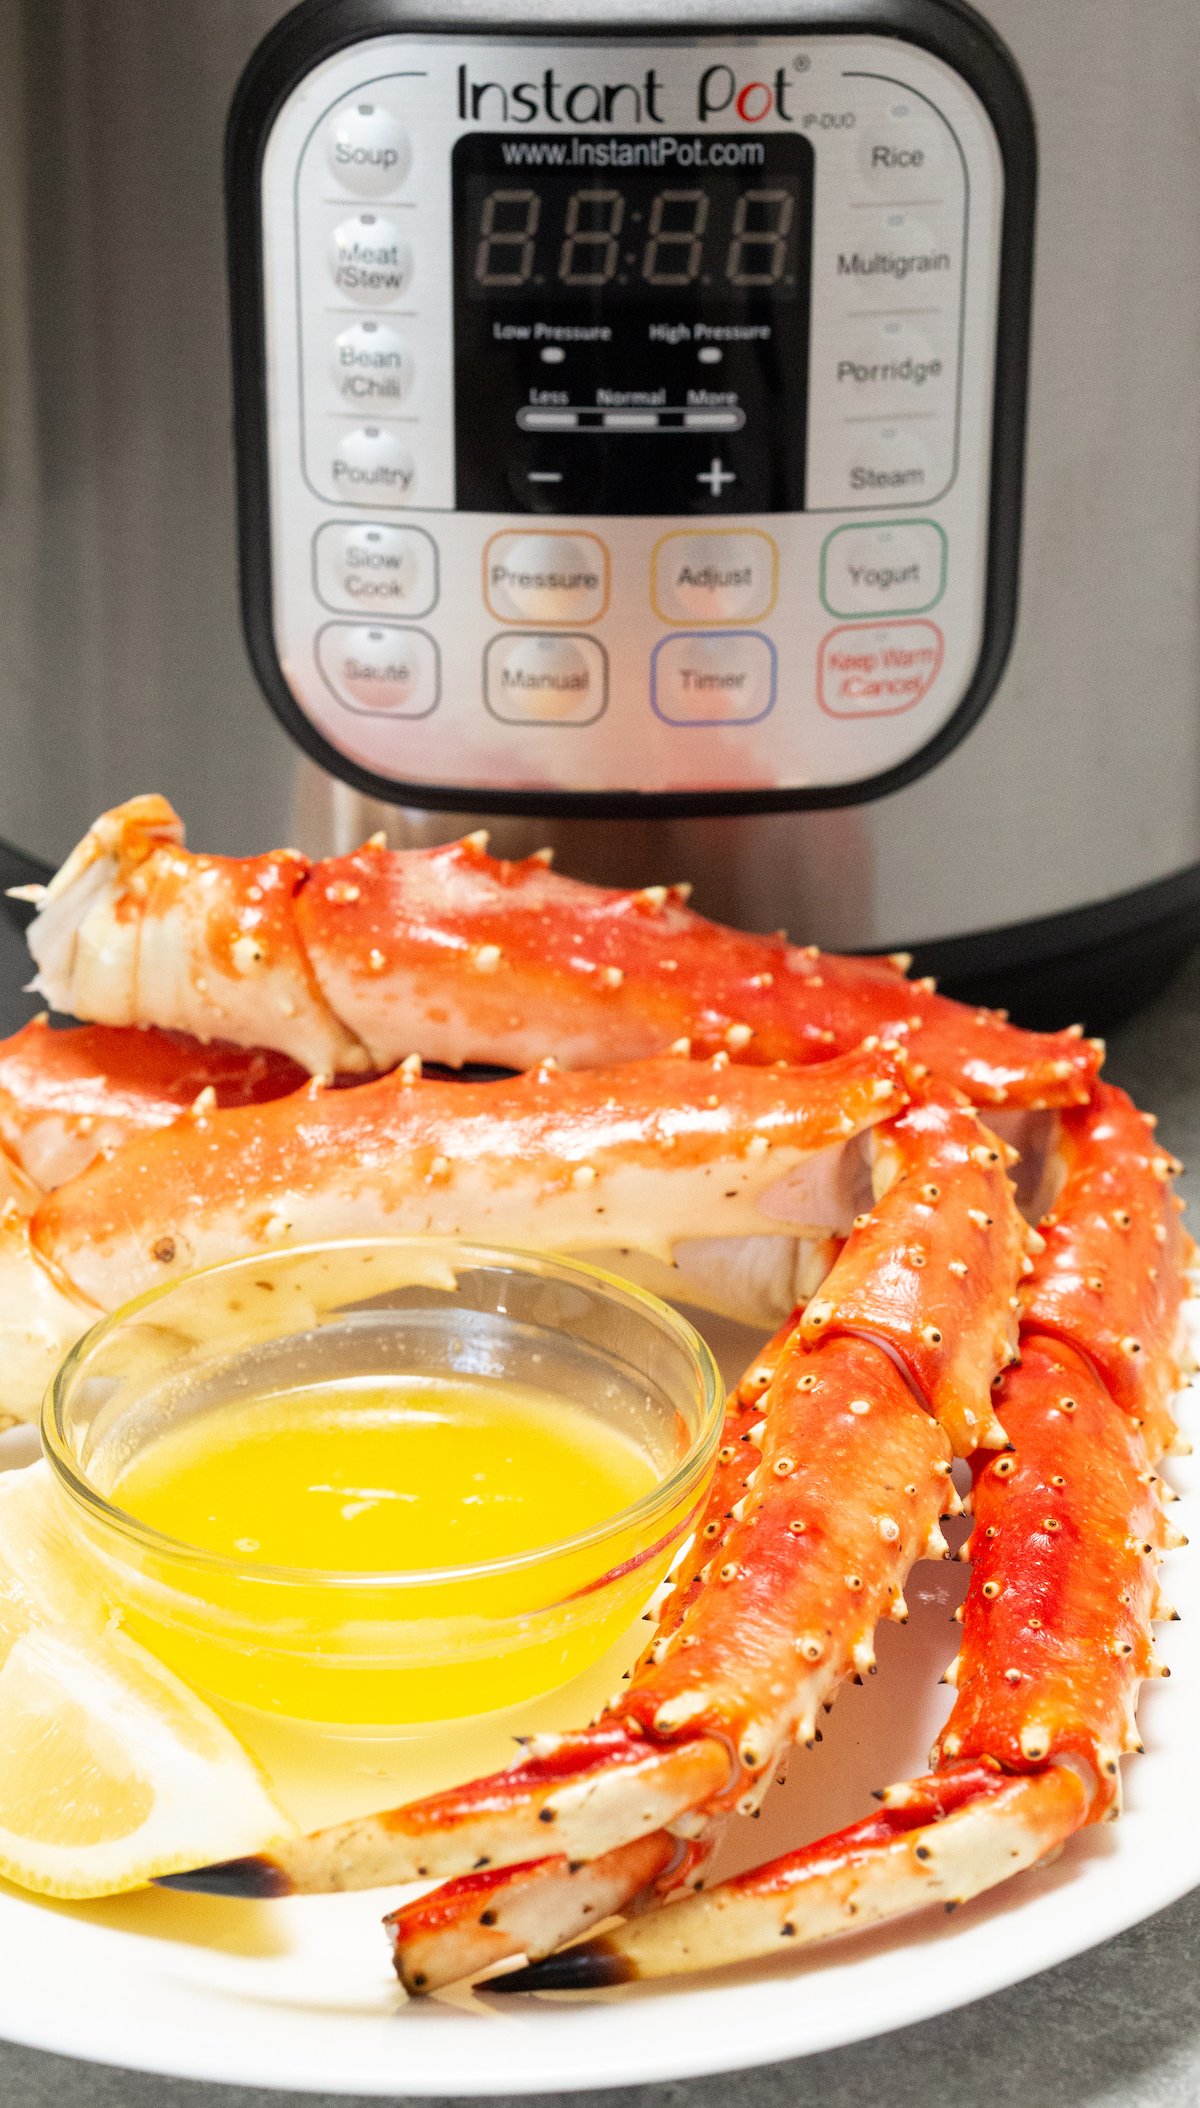 Three cooked crab legs sit on a plate with butter in front of an Instant Pot